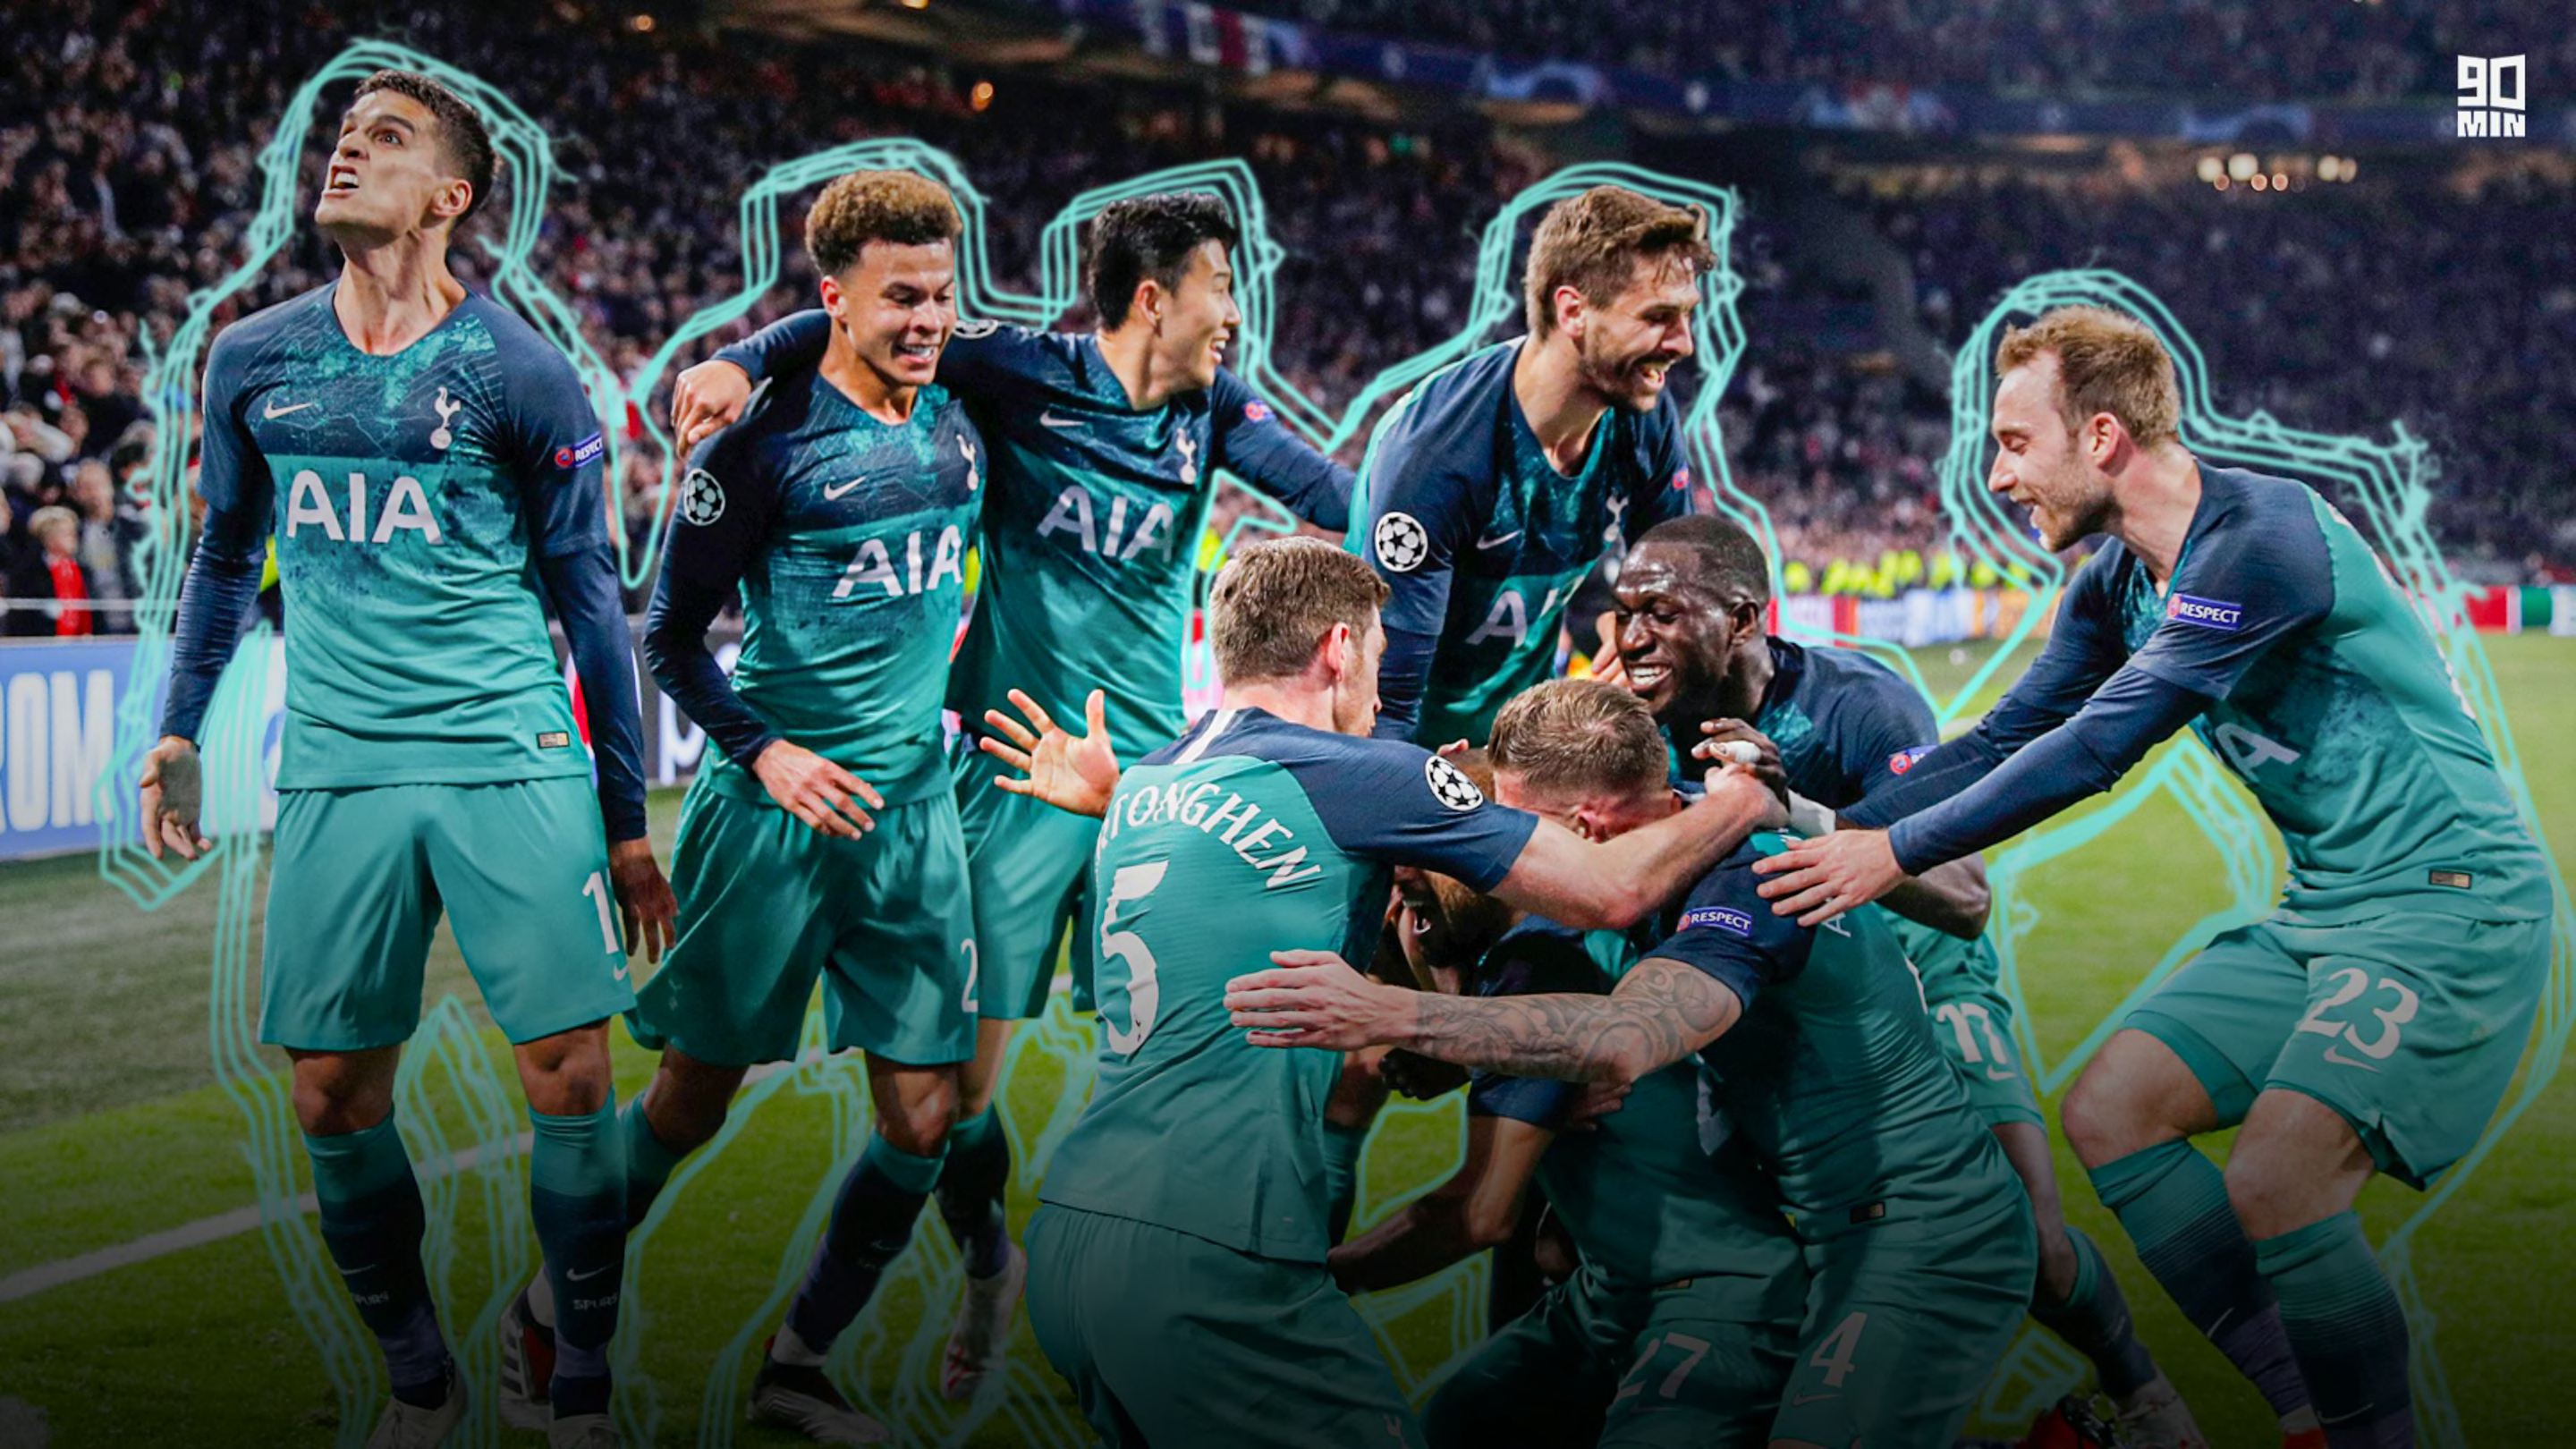 'Lost in complete ecstasy' - An oral history of Ajax 2-3 Tottenham